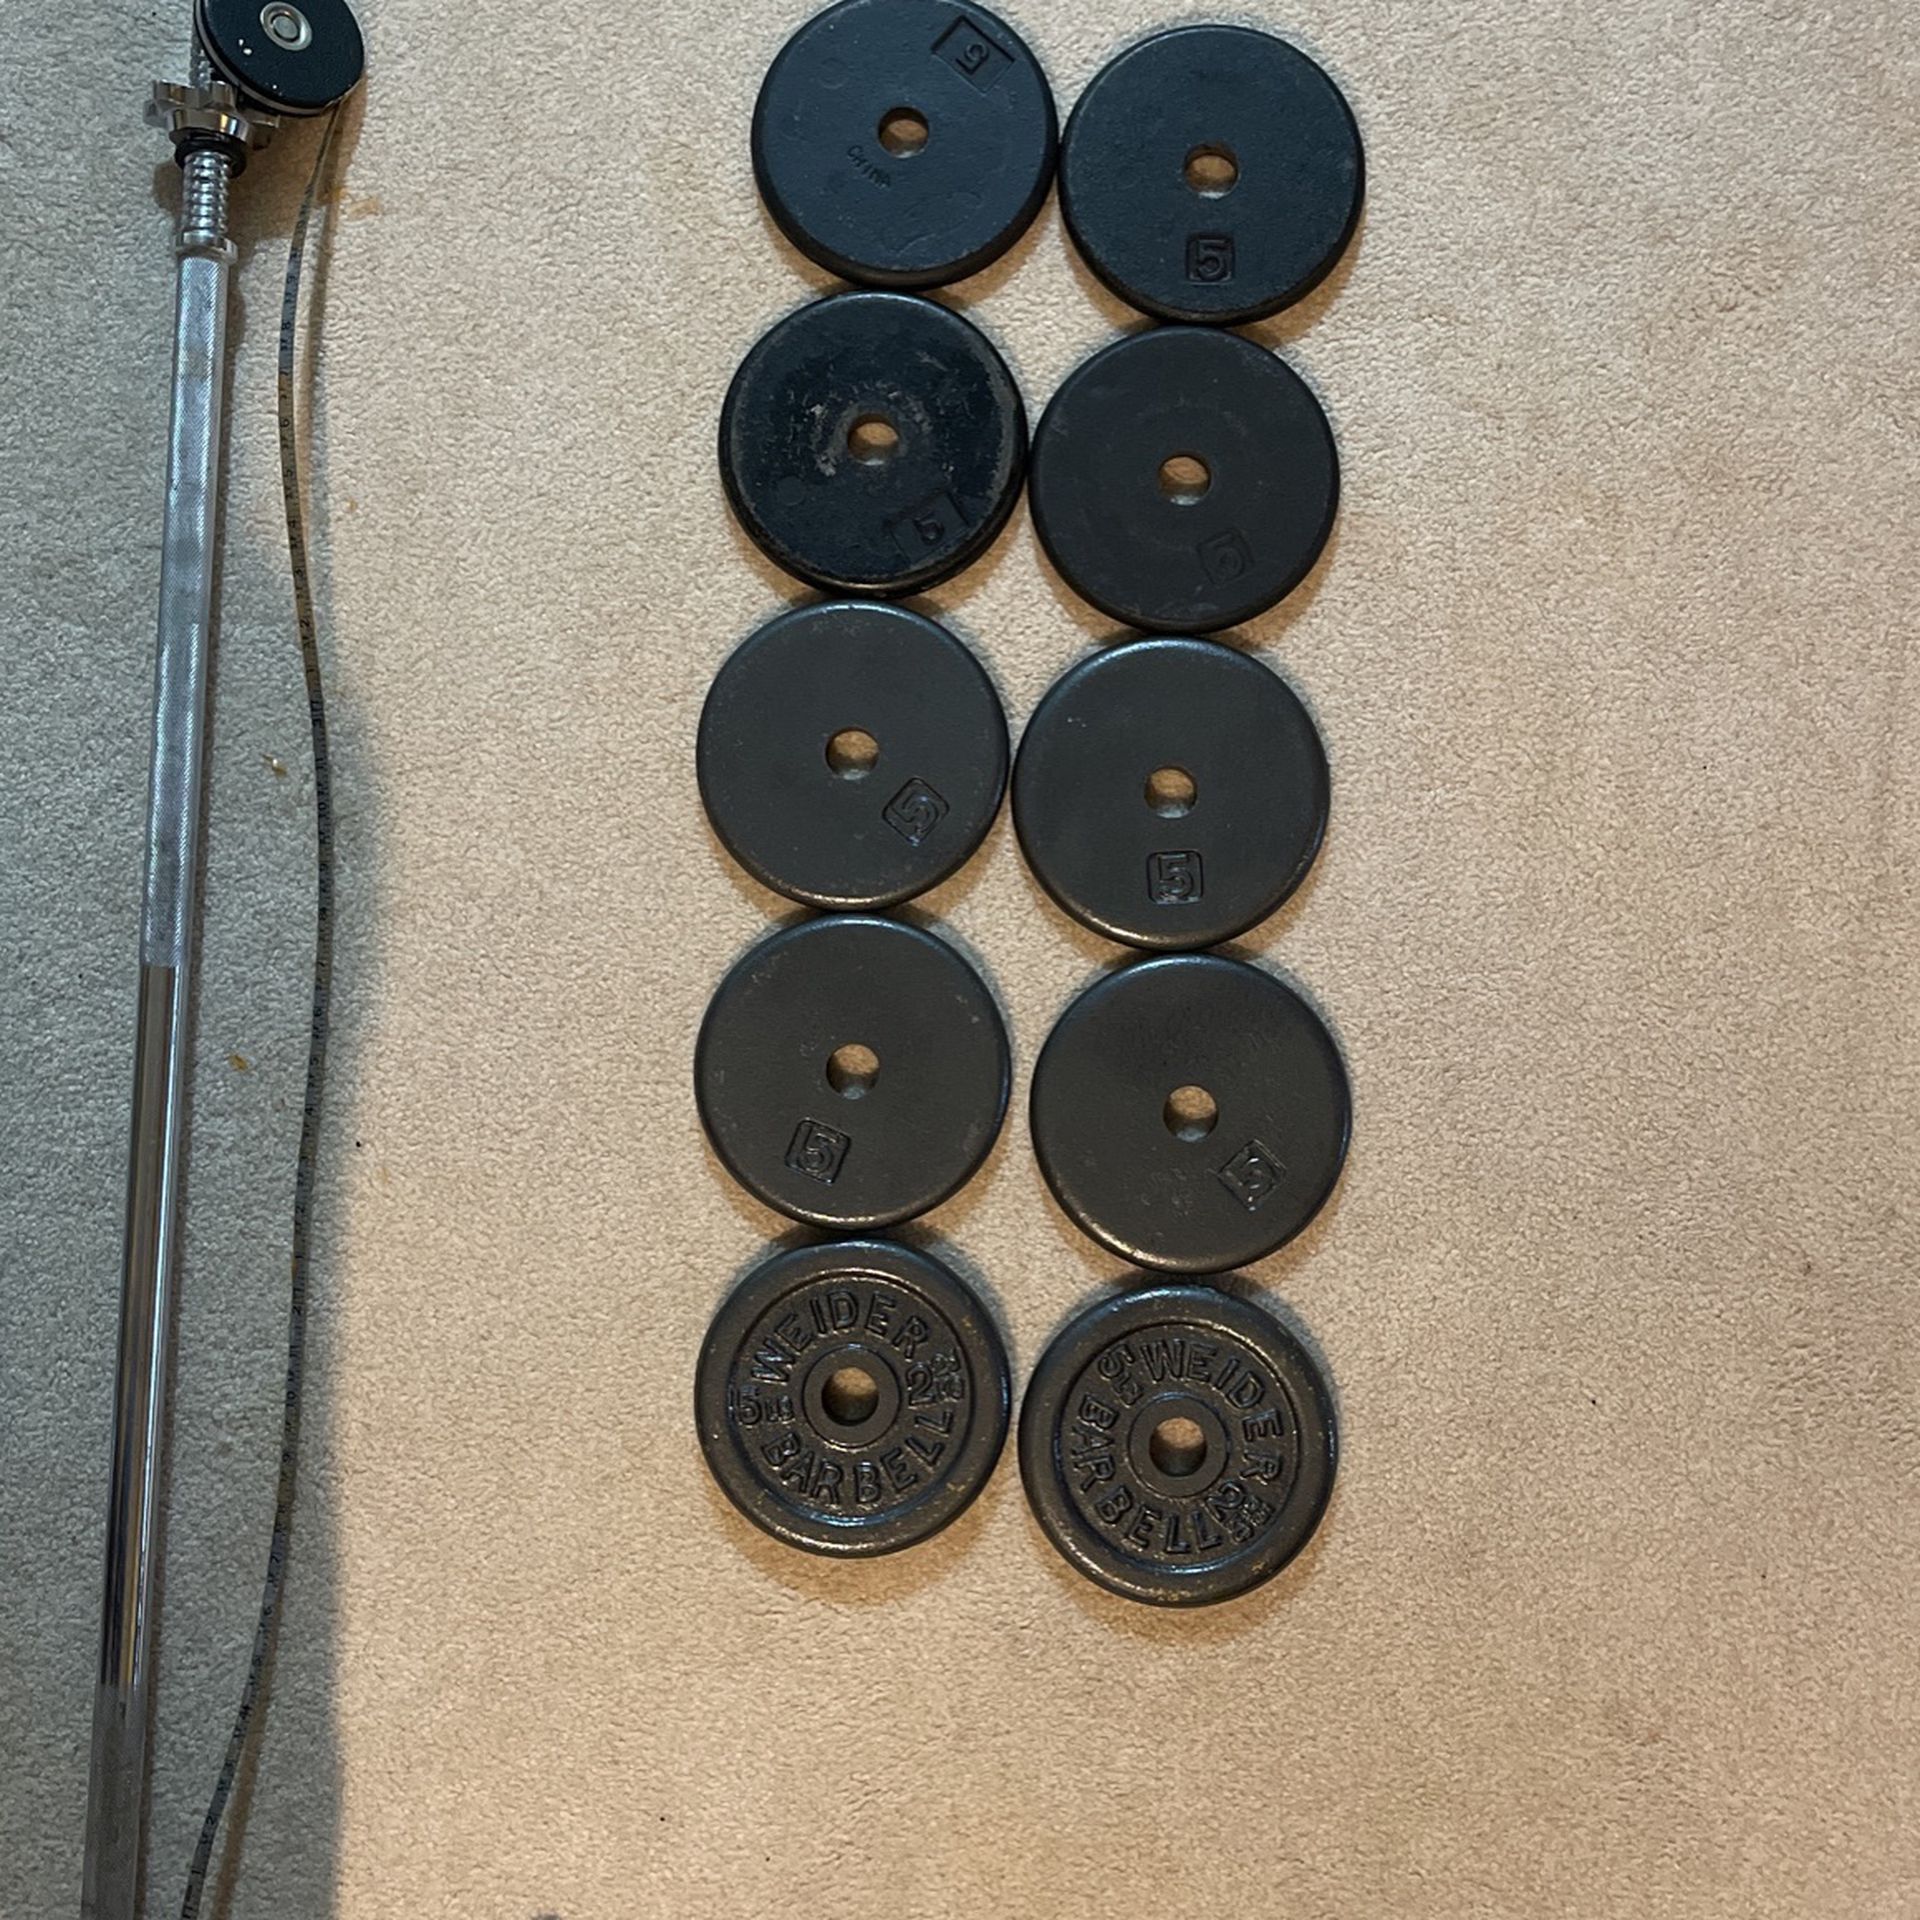 5 Lb Weight Plates